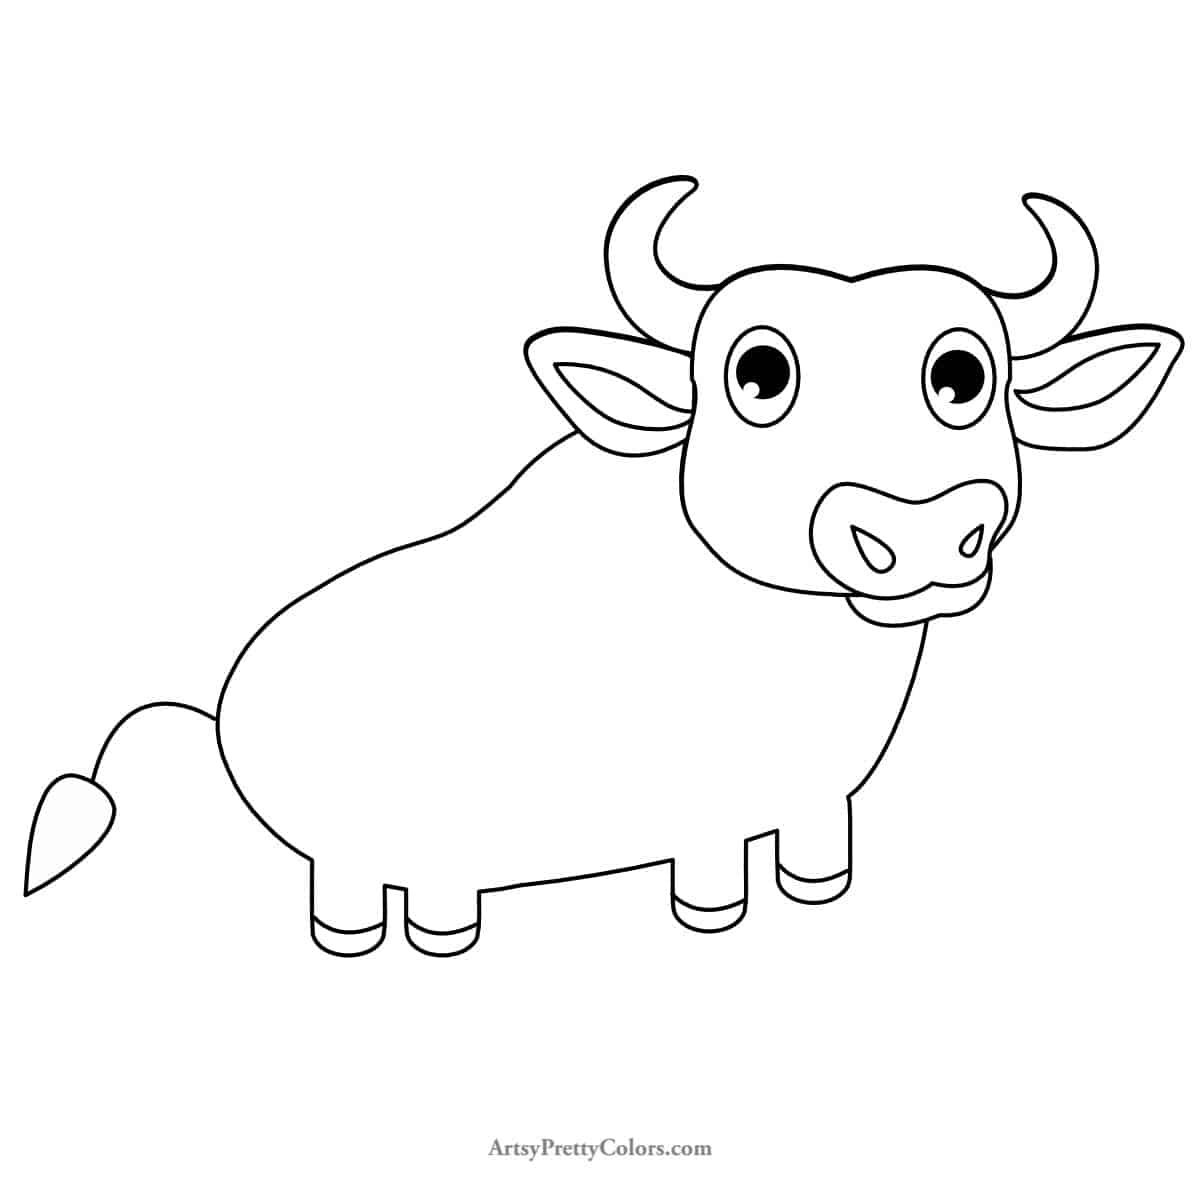 final drawing of a bull